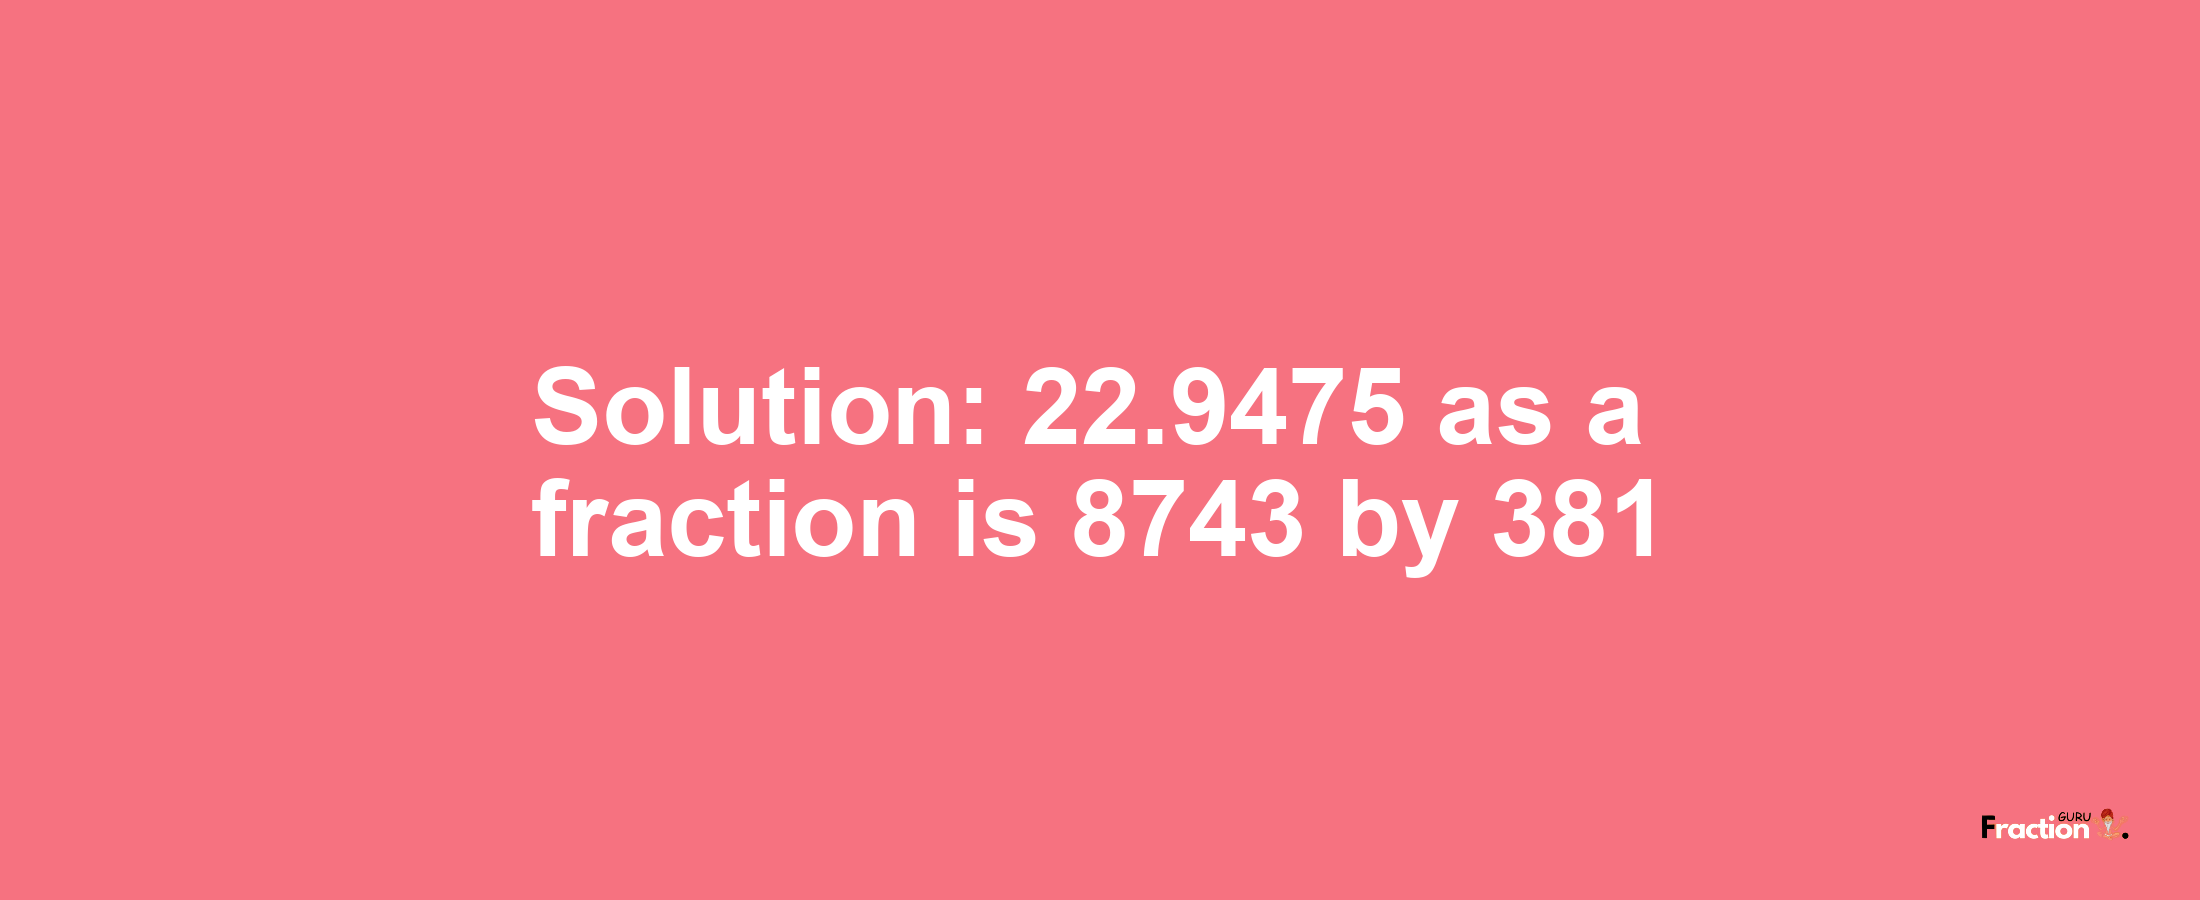 Solution:22.9475 as a fraction is 8743/381